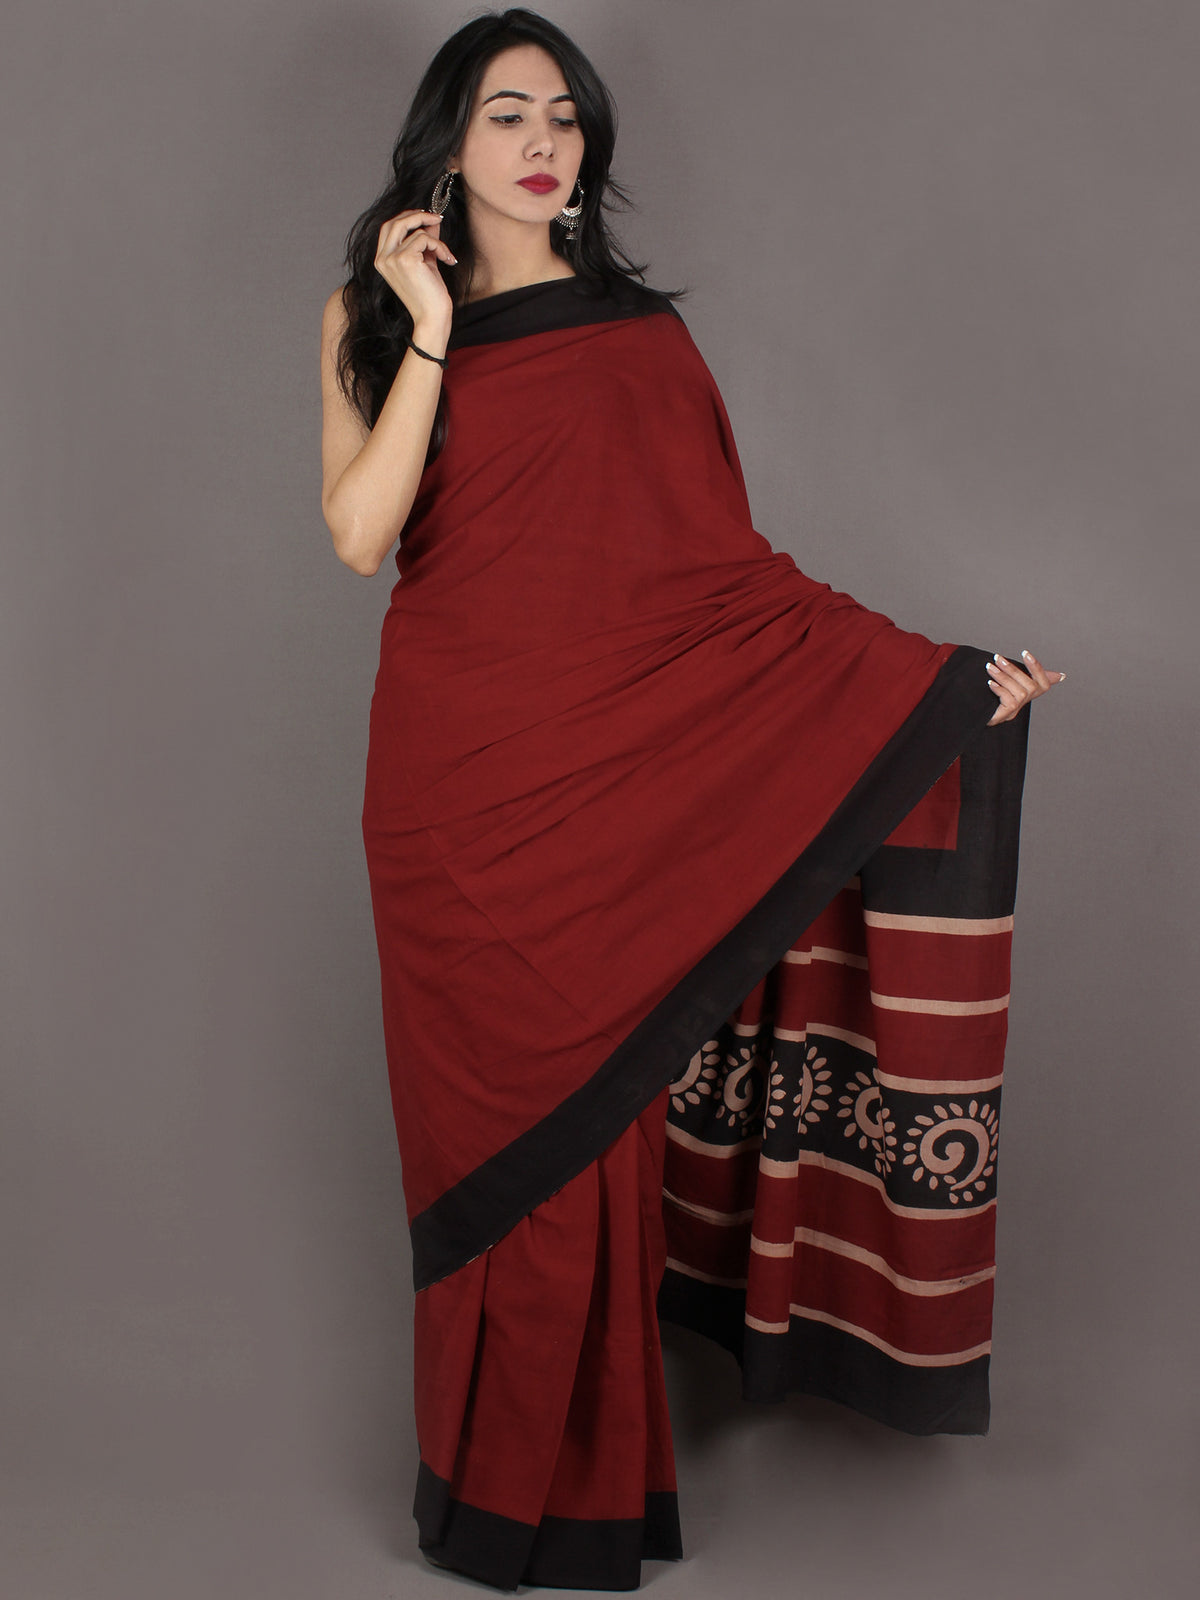 Maroon Black Hand Block Painted & Printed in Natural Colors Cotton Mul Saree - S031701005